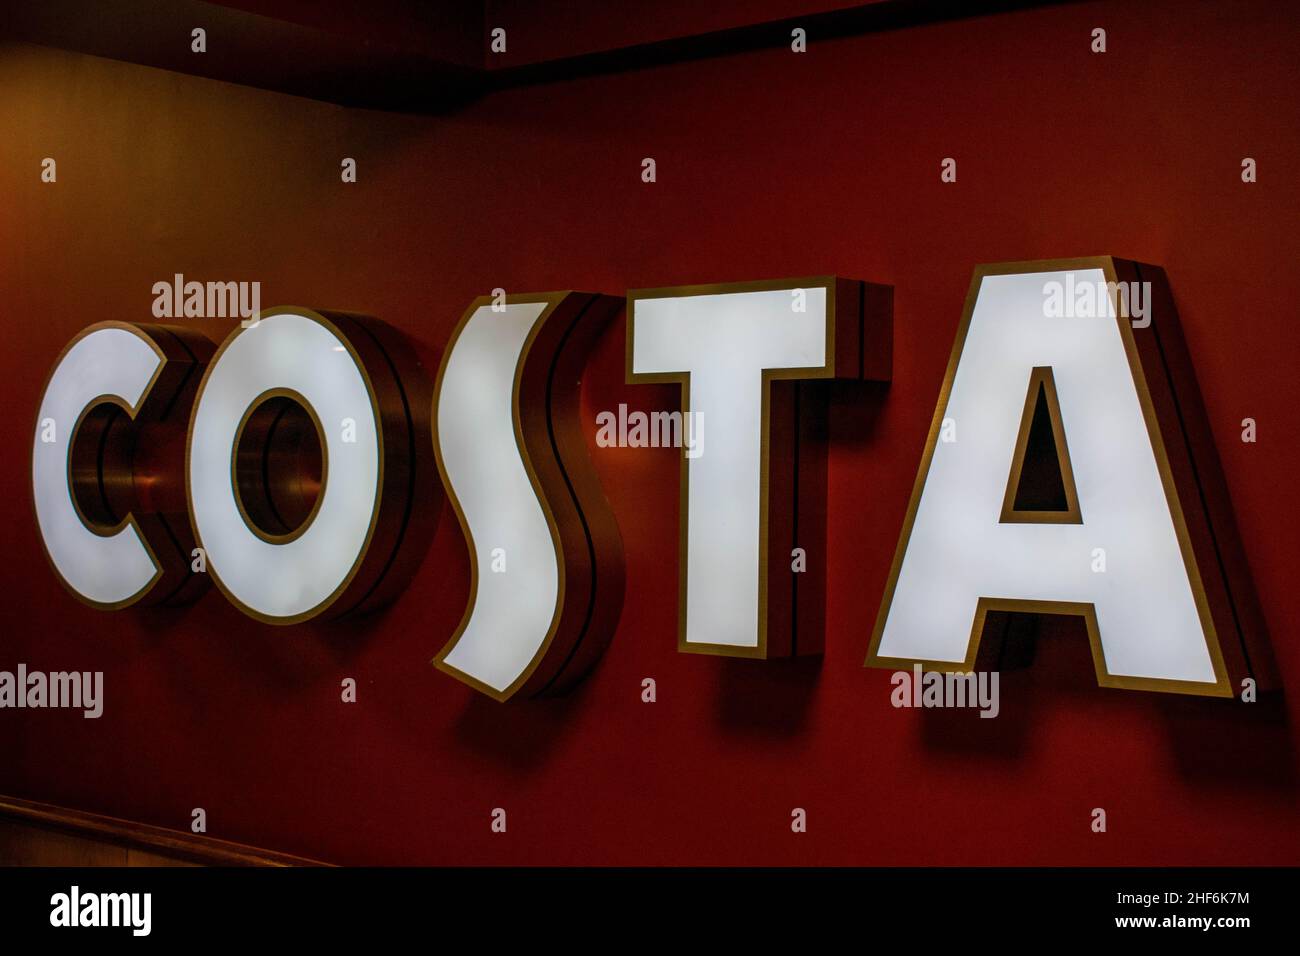 Durham, UK - 23rd August 2019: Costa Coffee illuminated advertising inside a coffeehouse. The brand was founded in London in 1971 by the Costa family. Stock Photo